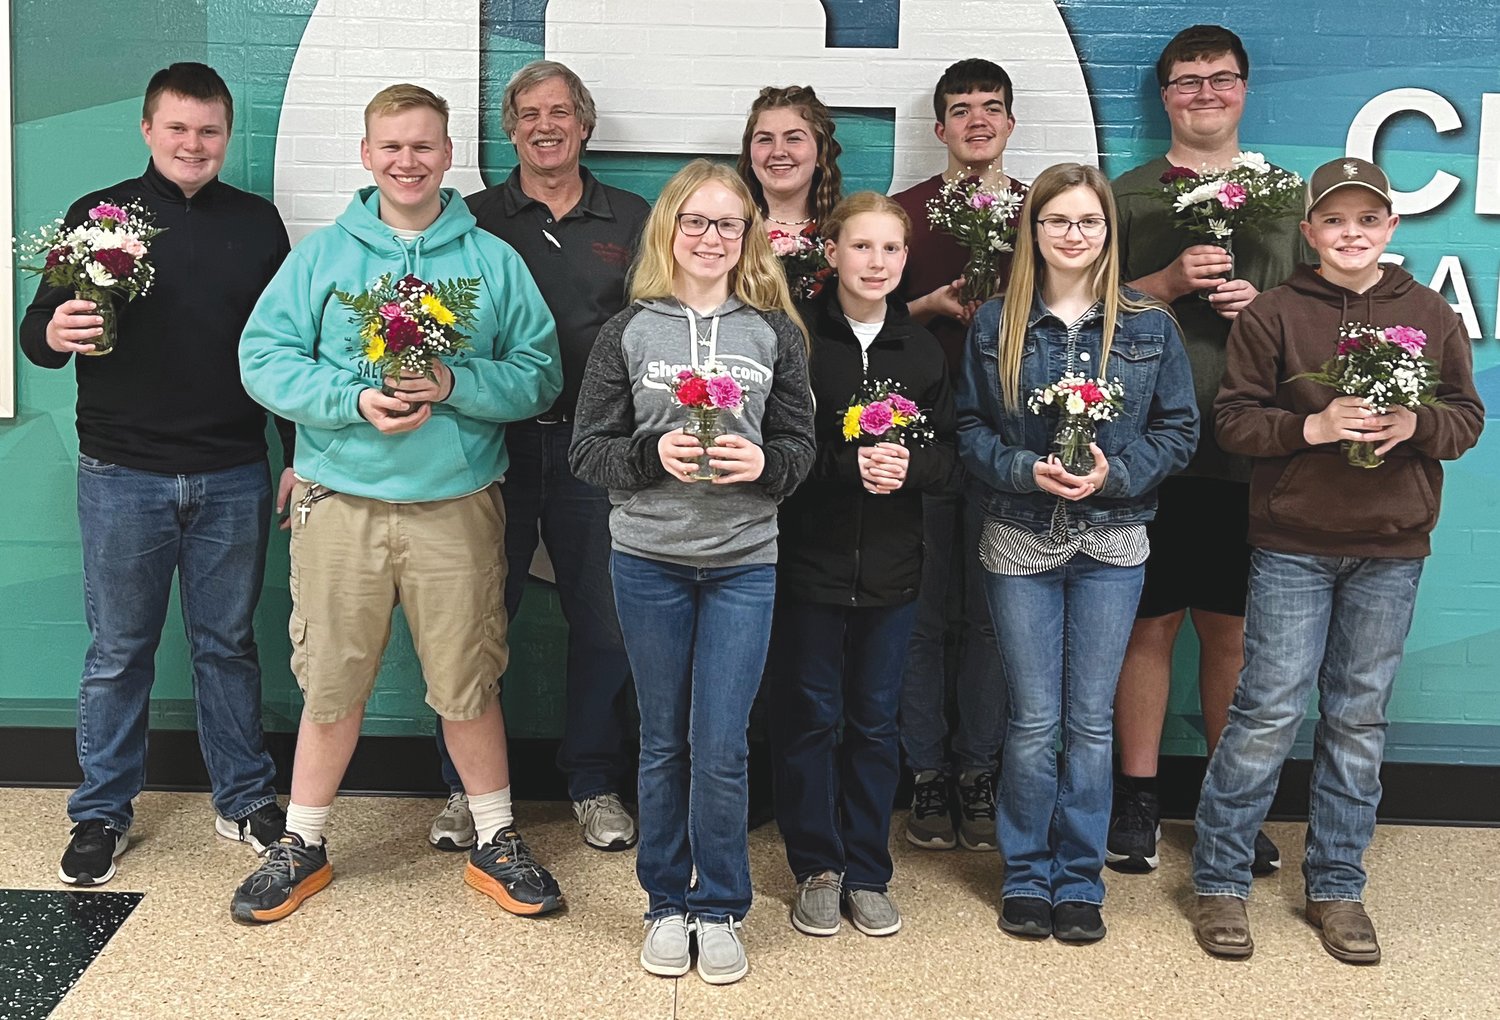 Pictured, from left, front row: Caden Sixberry, Natalie Rhoads, Amarah Shannon, Helen Butcher and Daniel Simpson; and back row, Cole Rhoads, Gary Mosbaugh, Kelsey Thompson, Levi Brush and Gabriel Little..